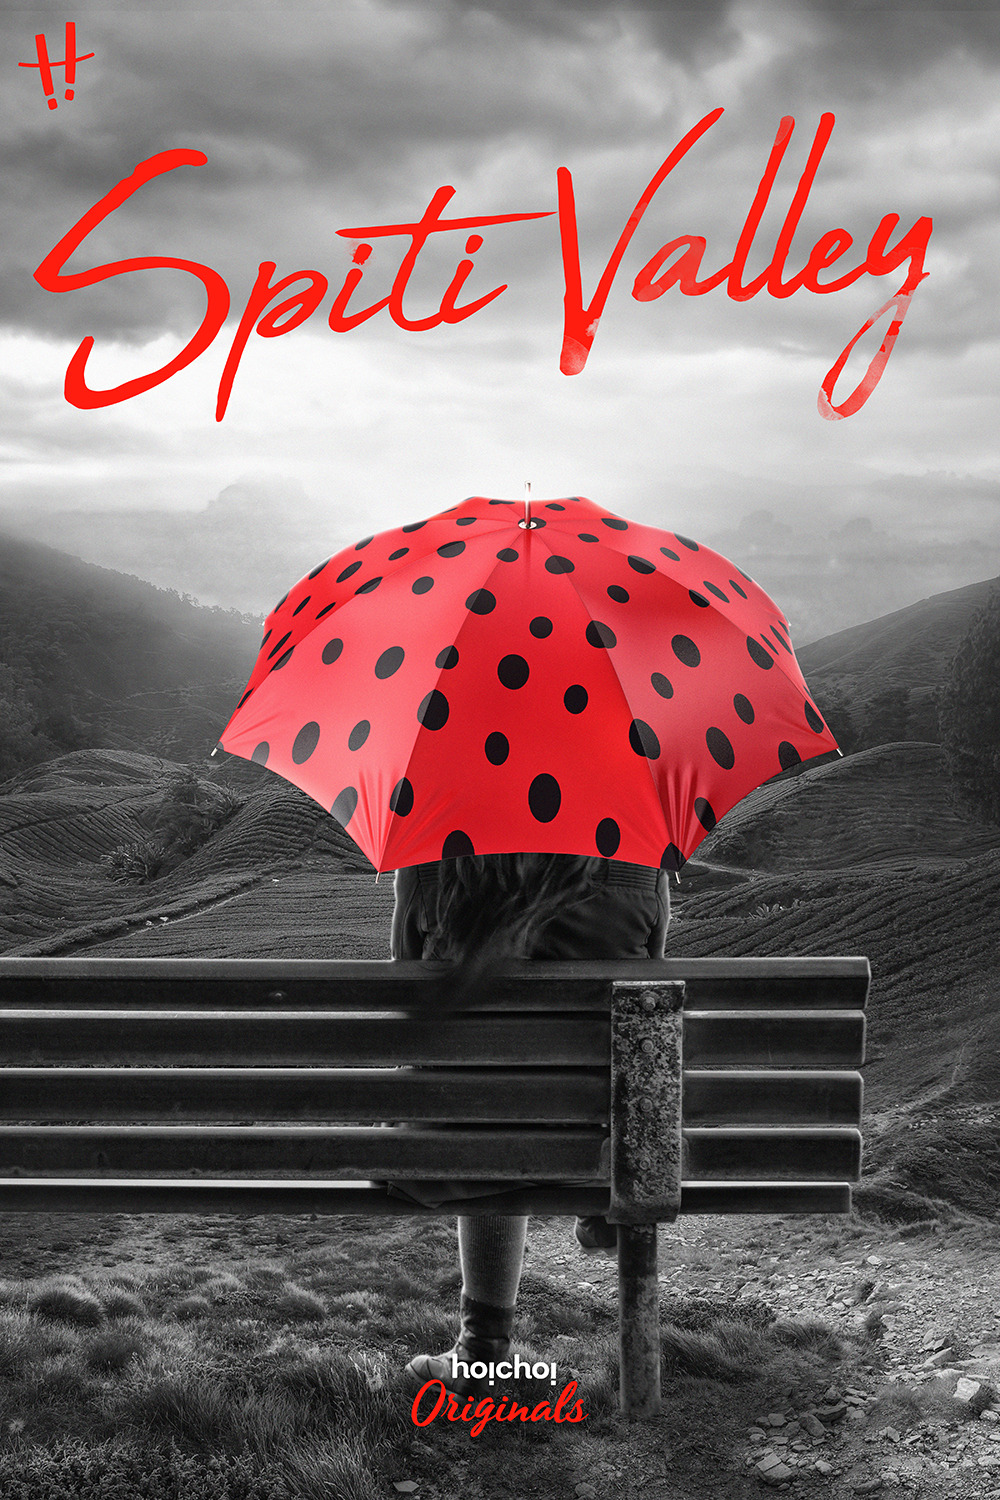 Extra Large TV Poster Image for Spiti Valley 